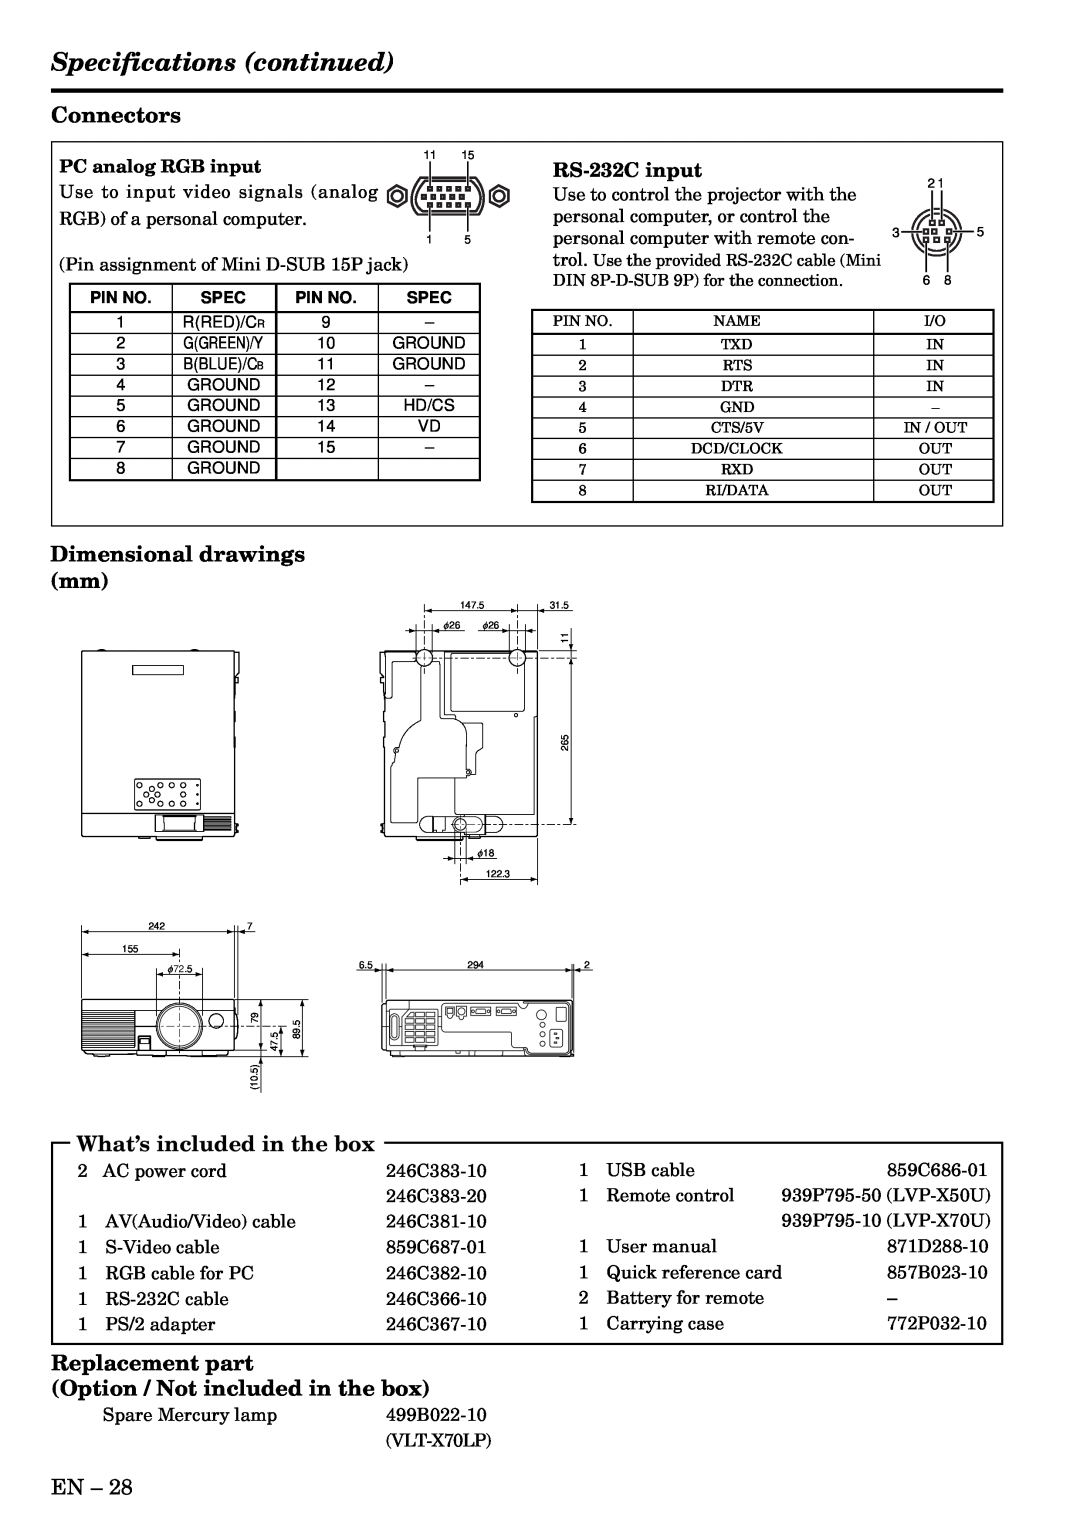 Mitsubishi Electronics X70U Specifications continued, Connectors, Dimensional drawings mm, What’s included in the box 